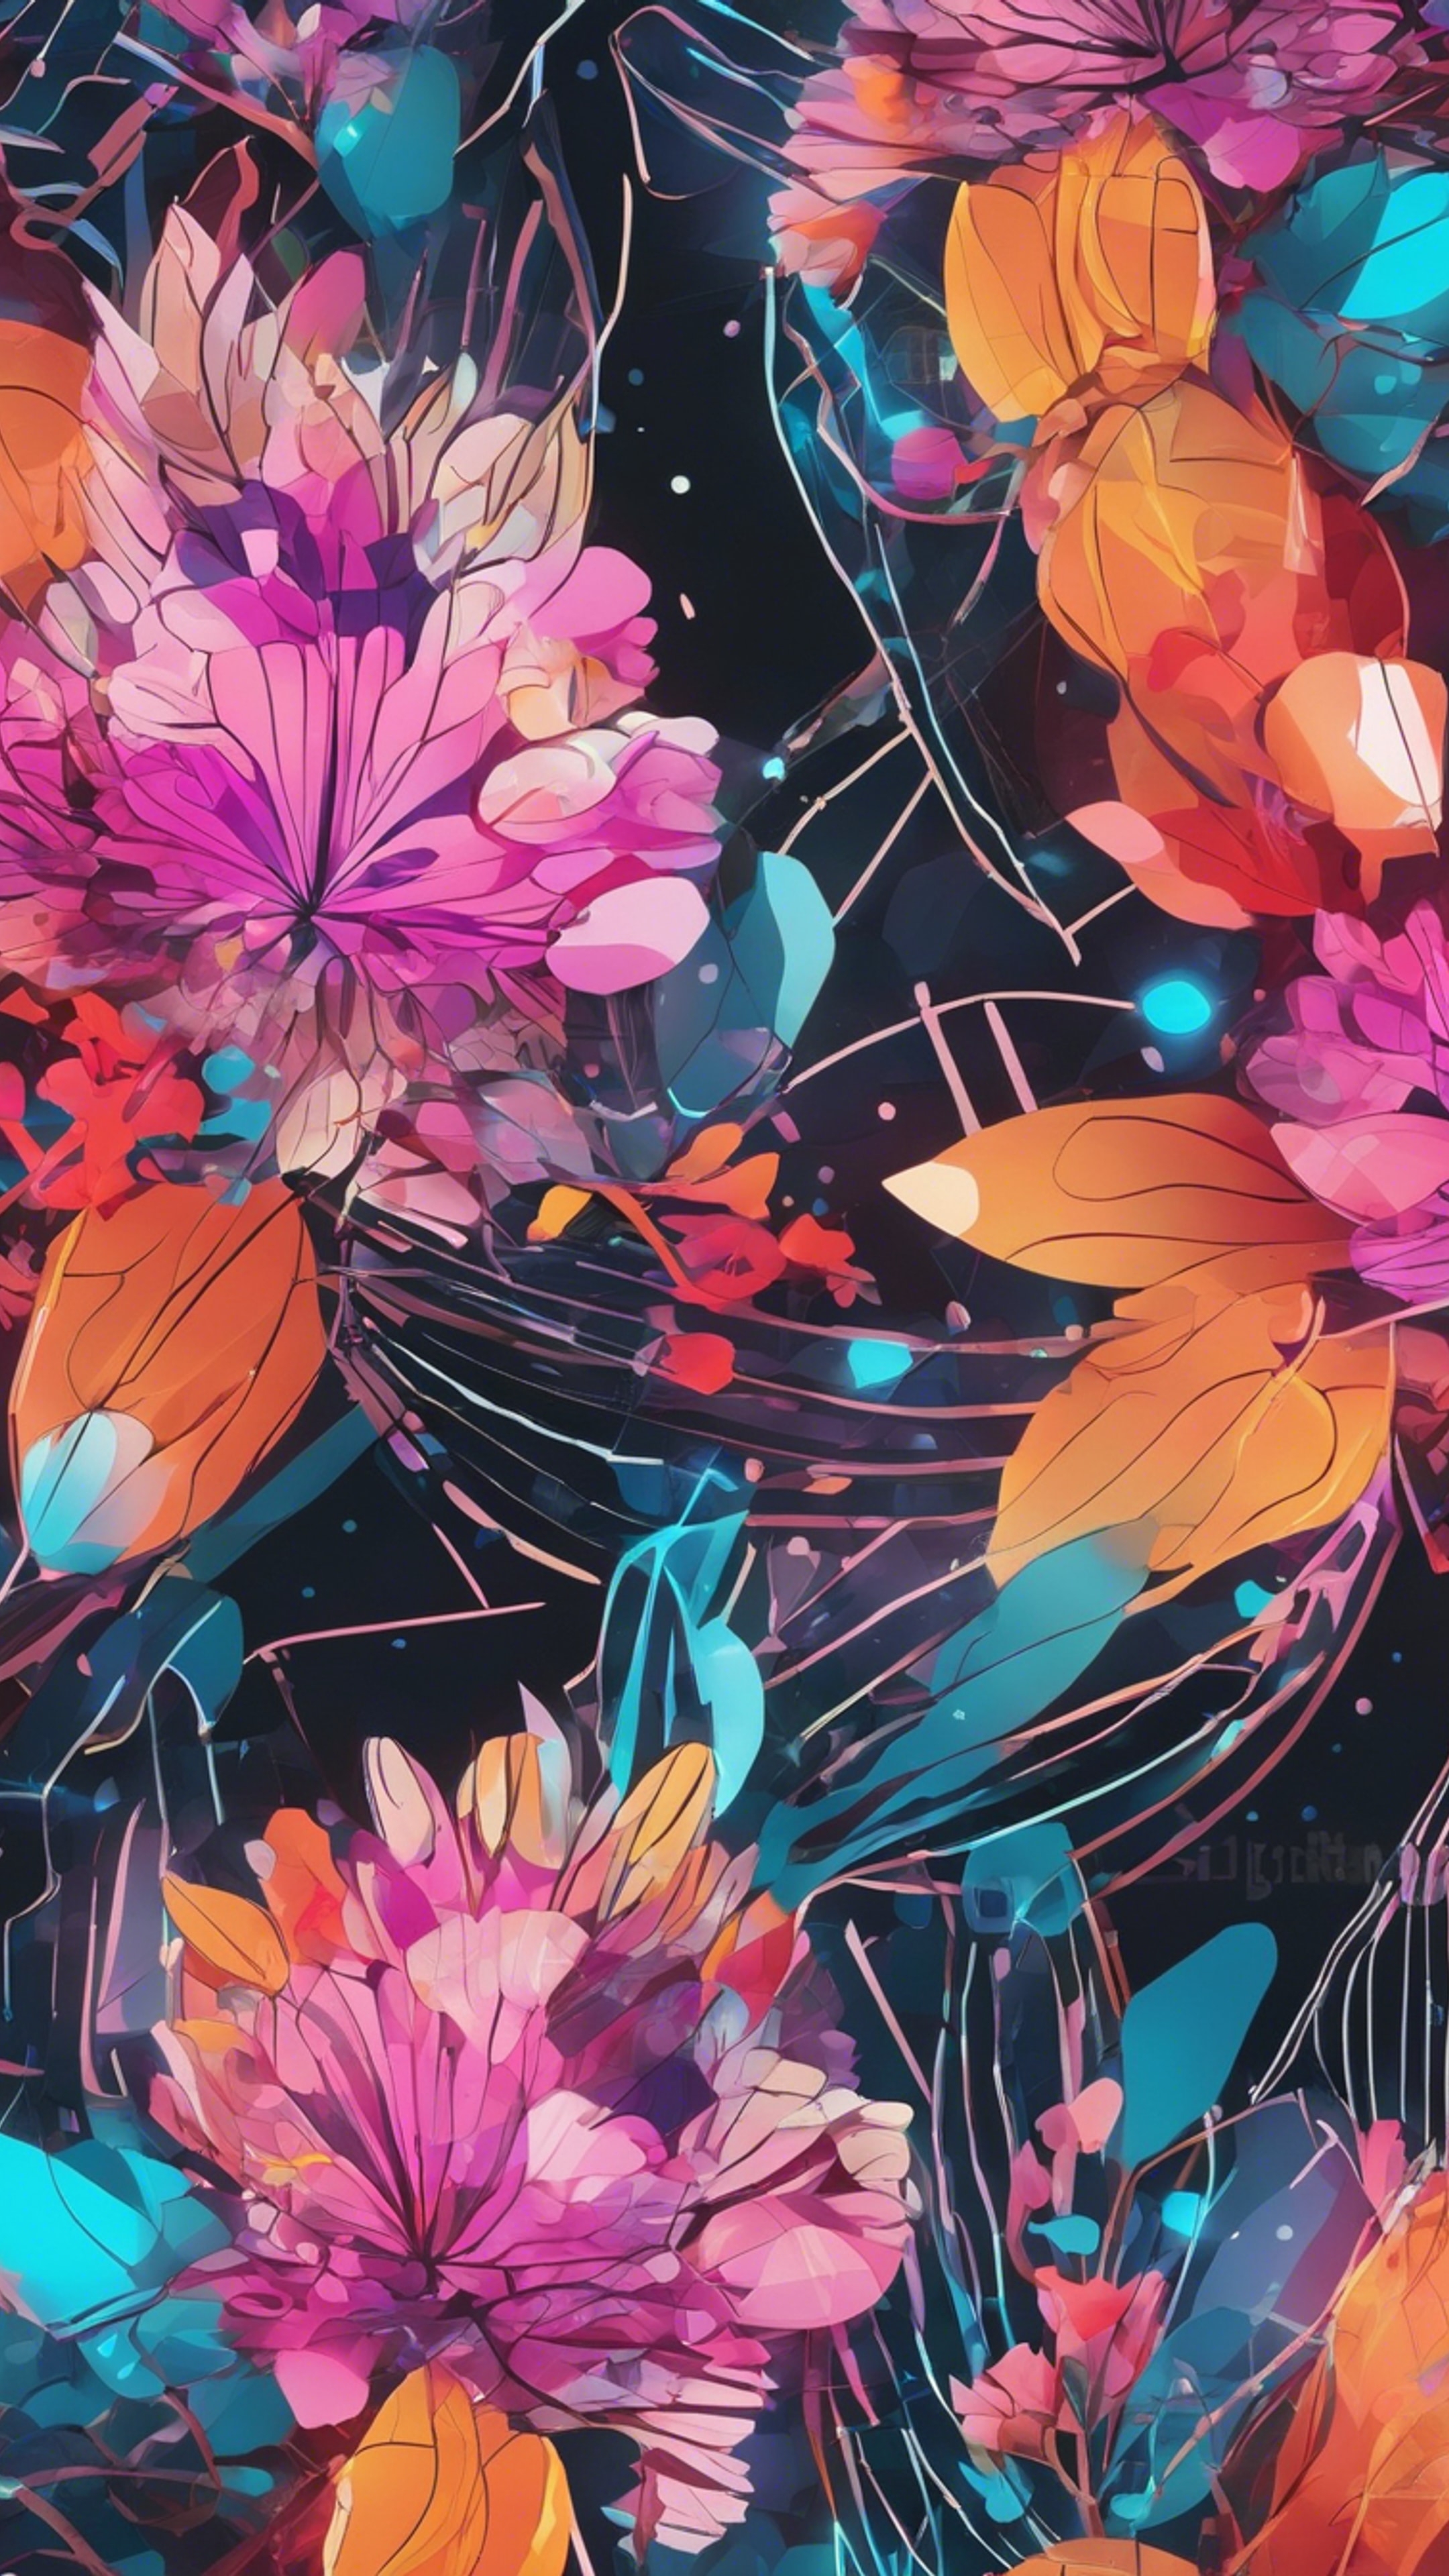 An abstract floral mural with neon colors and geometric shapes.壁紙[dbf69e102c2a463b802a]